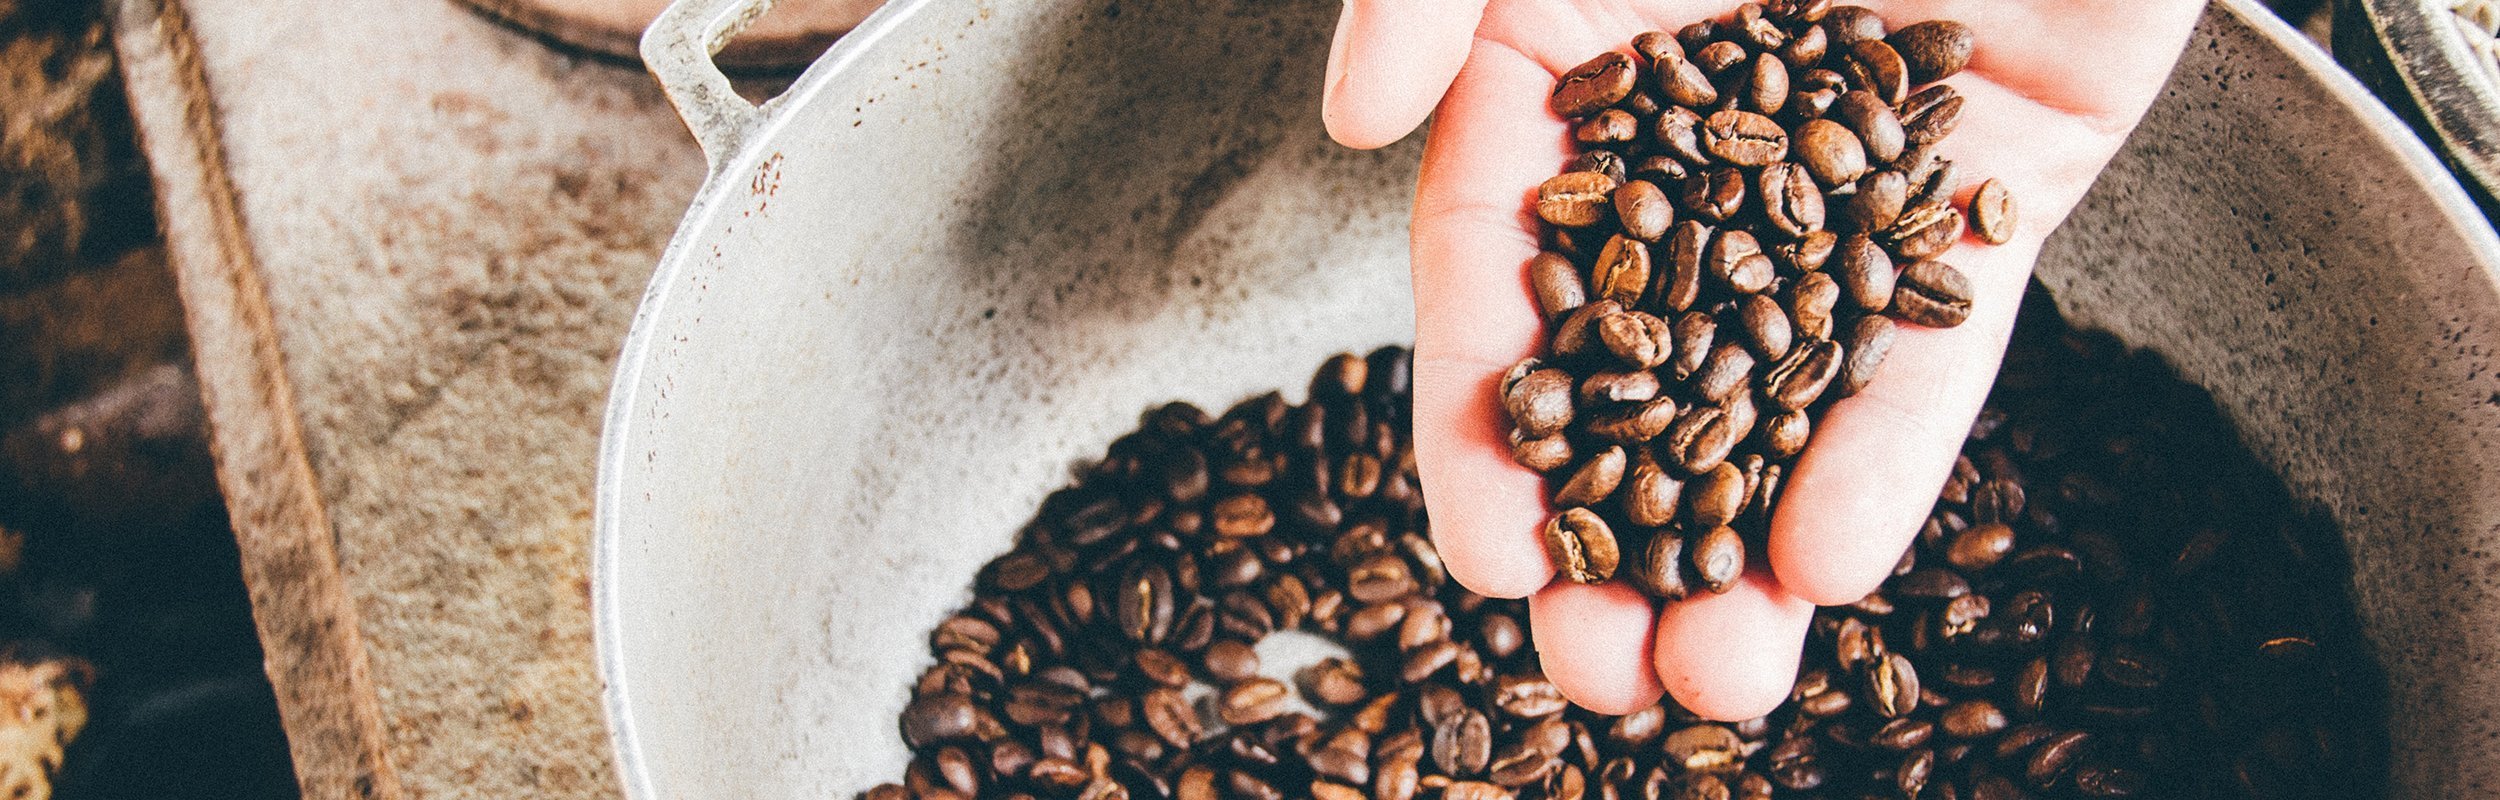 Fair trade and organic coffee: 3 awesome brands you should try